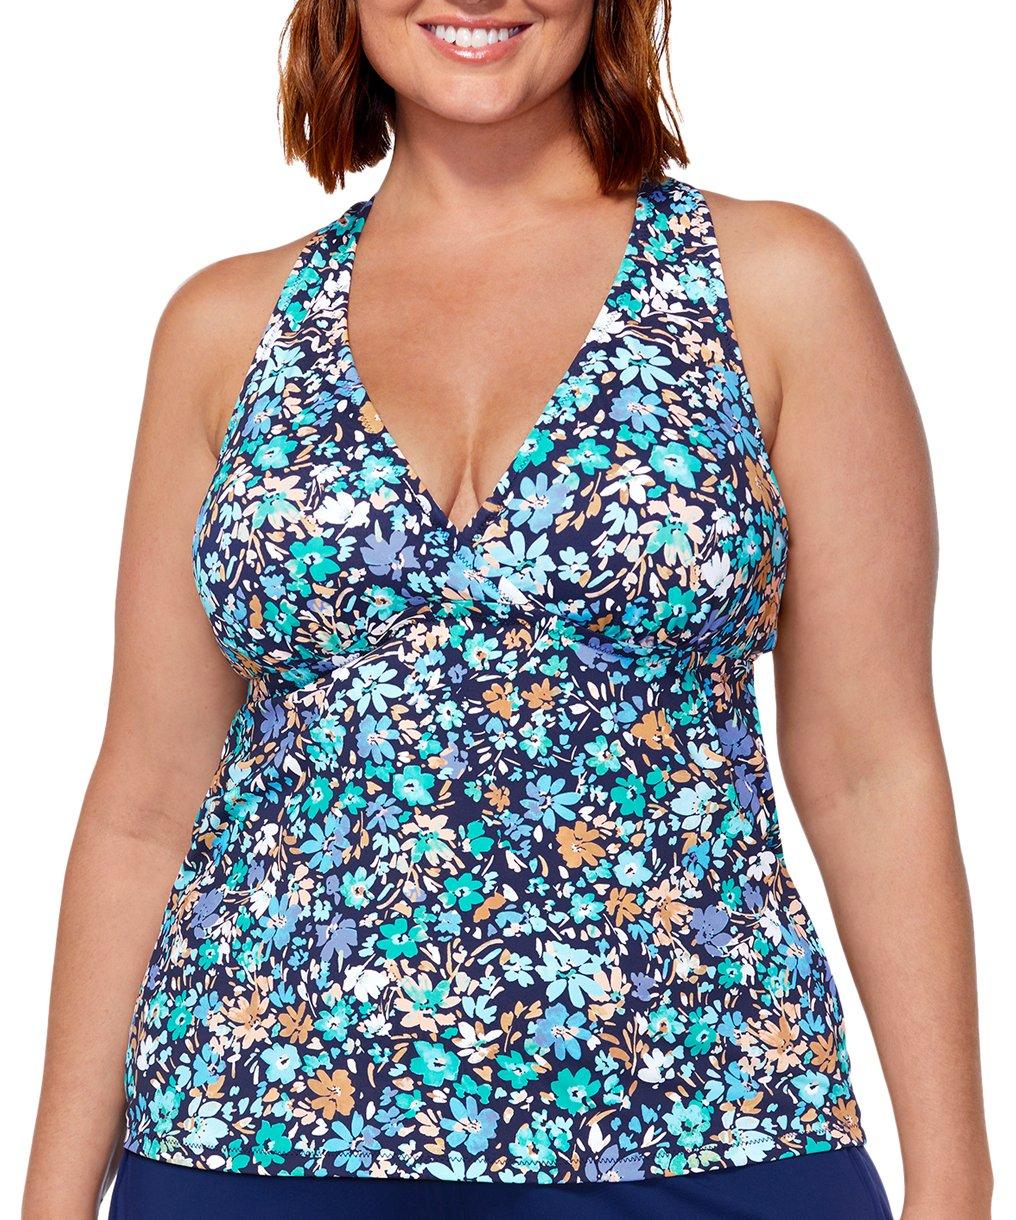 Plus Size Women's Bow Handkerchief Halter Tankini Top by Swimsuits